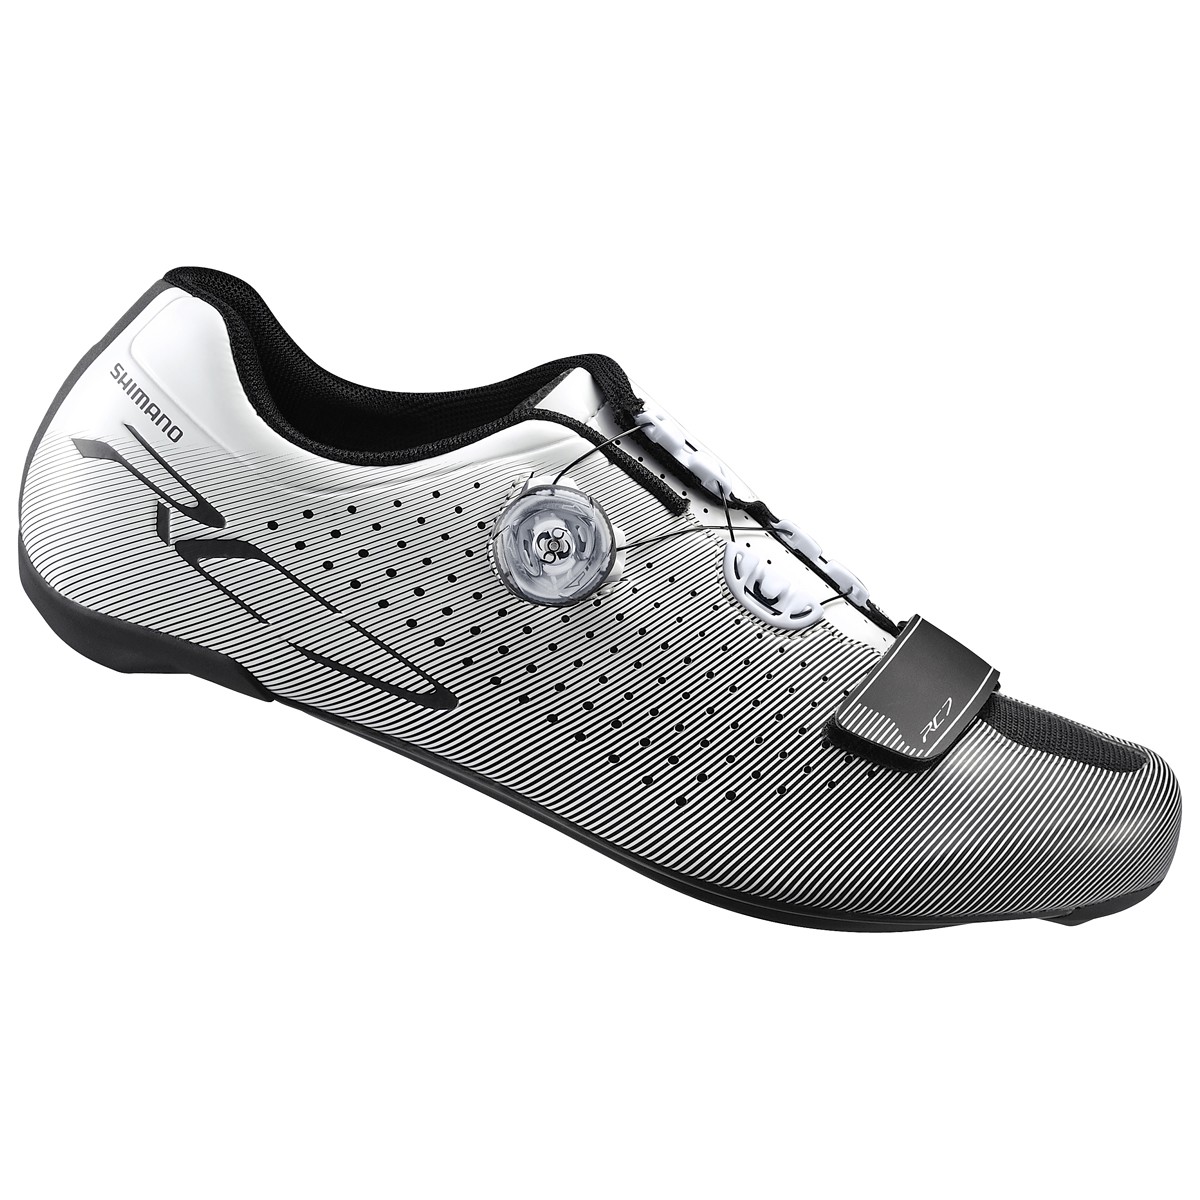 Shimano rc700 chaussures route blanc